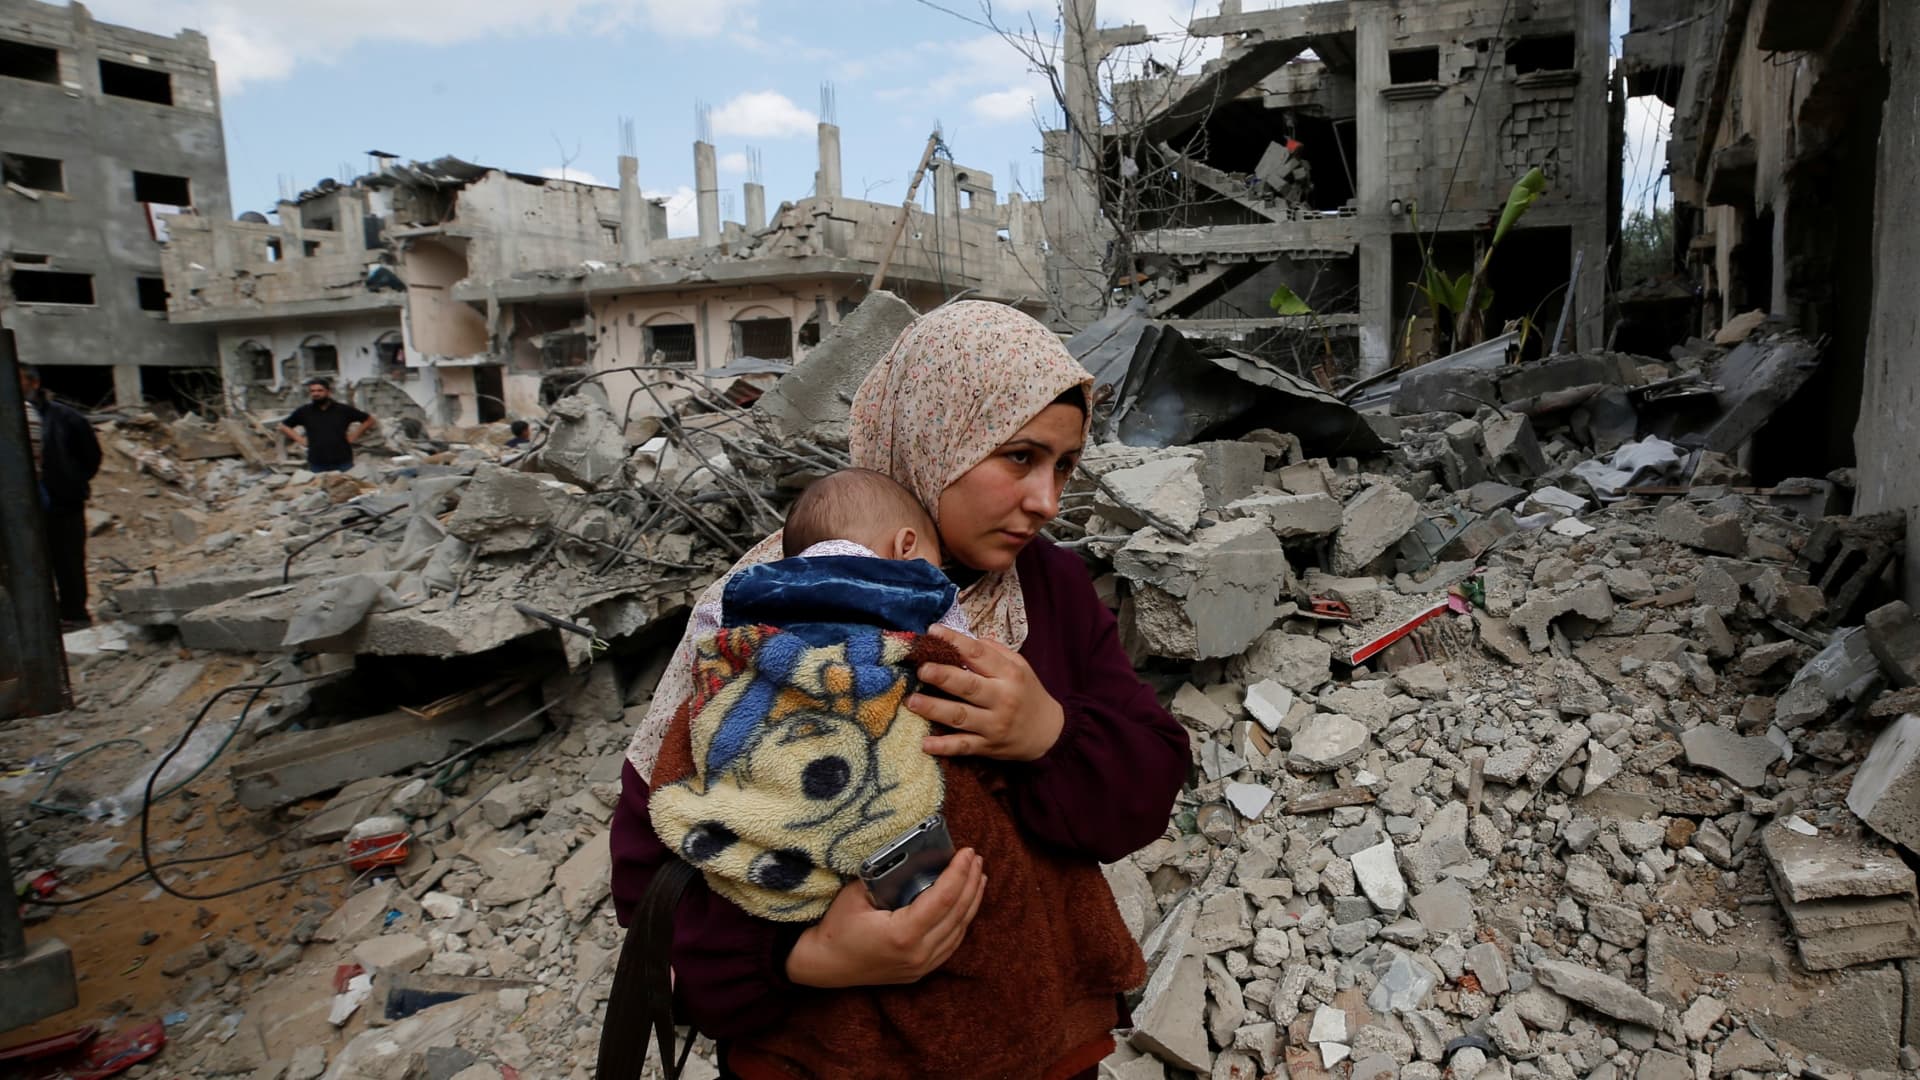 A Palestinian woman carries her child amid the rubble of their houses which were destroyed by Israeli air strikes during the Israel-Hamas fighting in Gaza May 23, 2021.